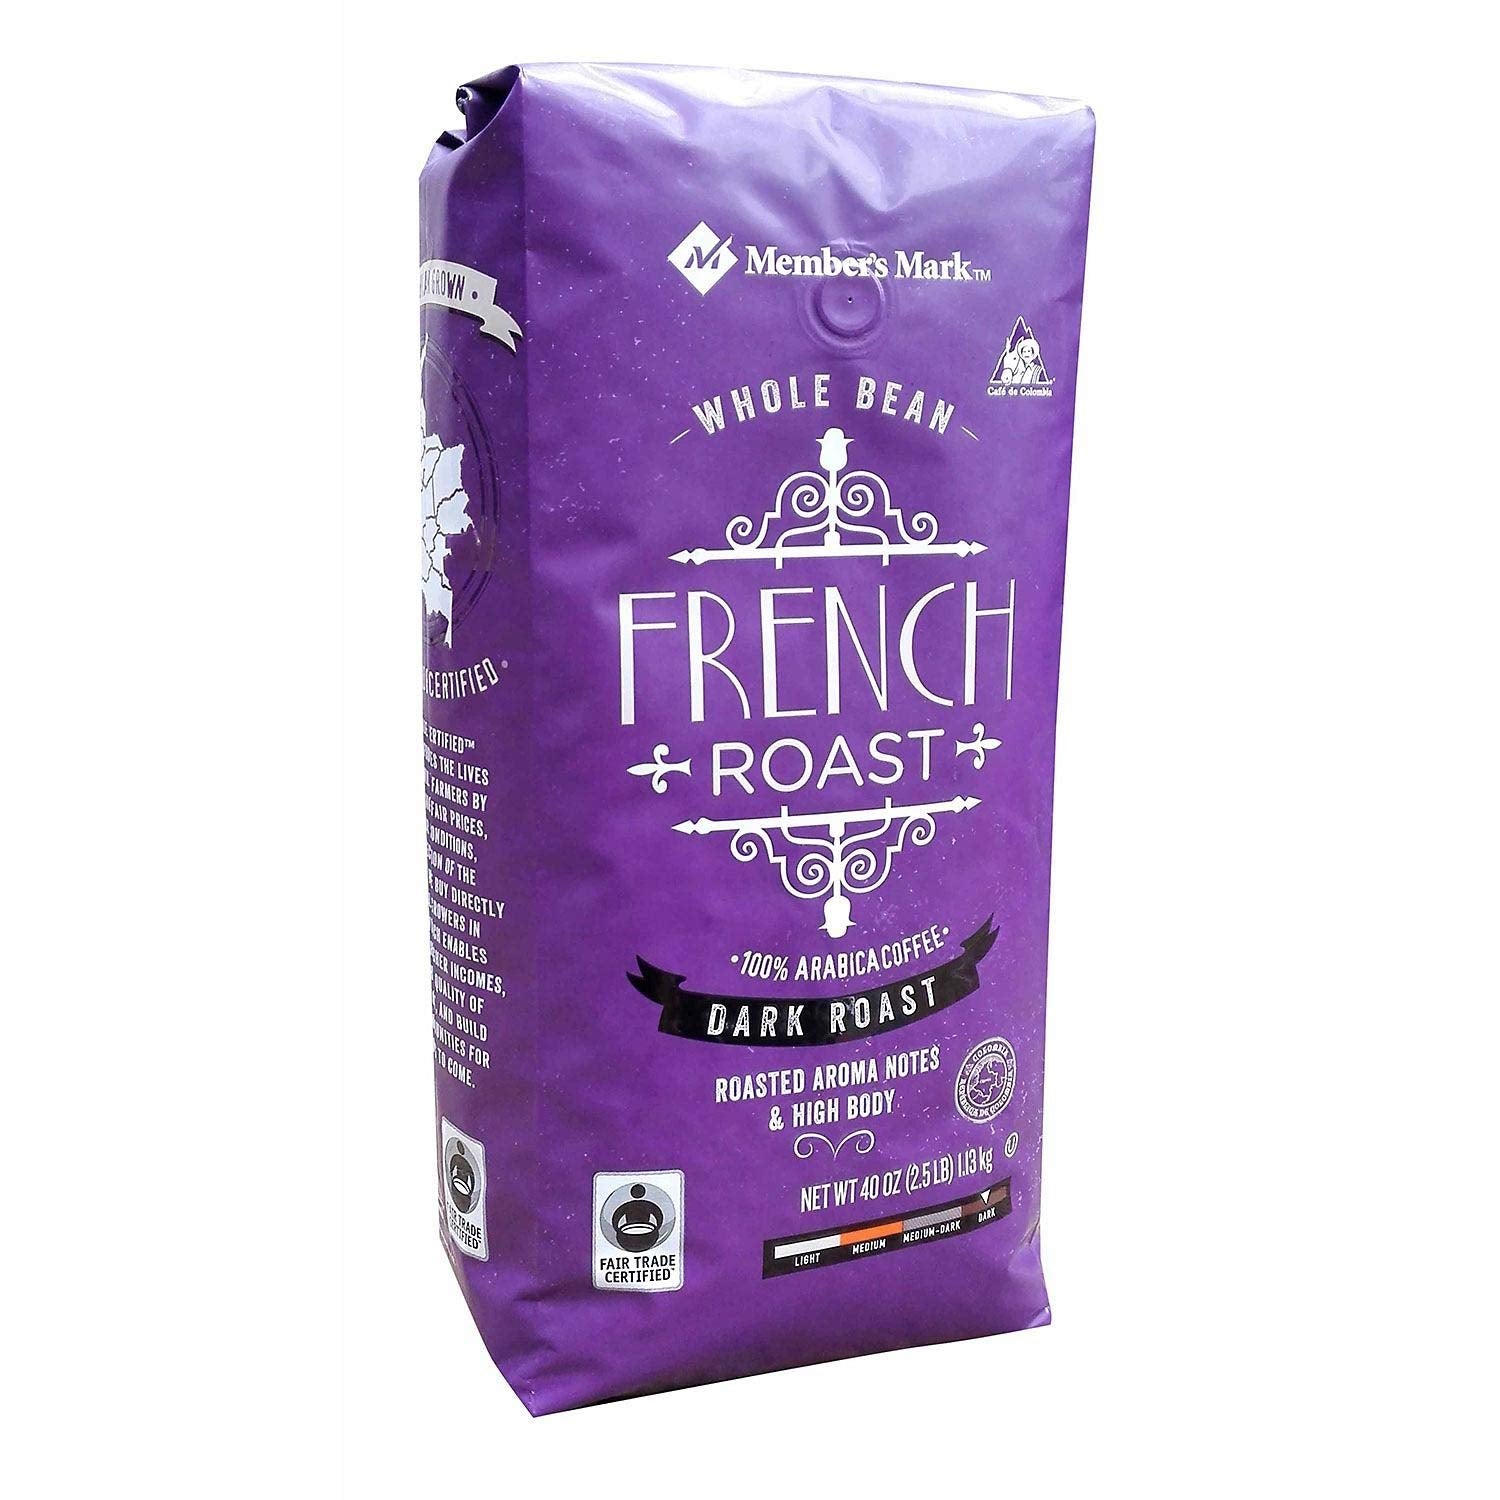 Member's Mark Fair Trade Certified French Roast Coffee, Whole Bean